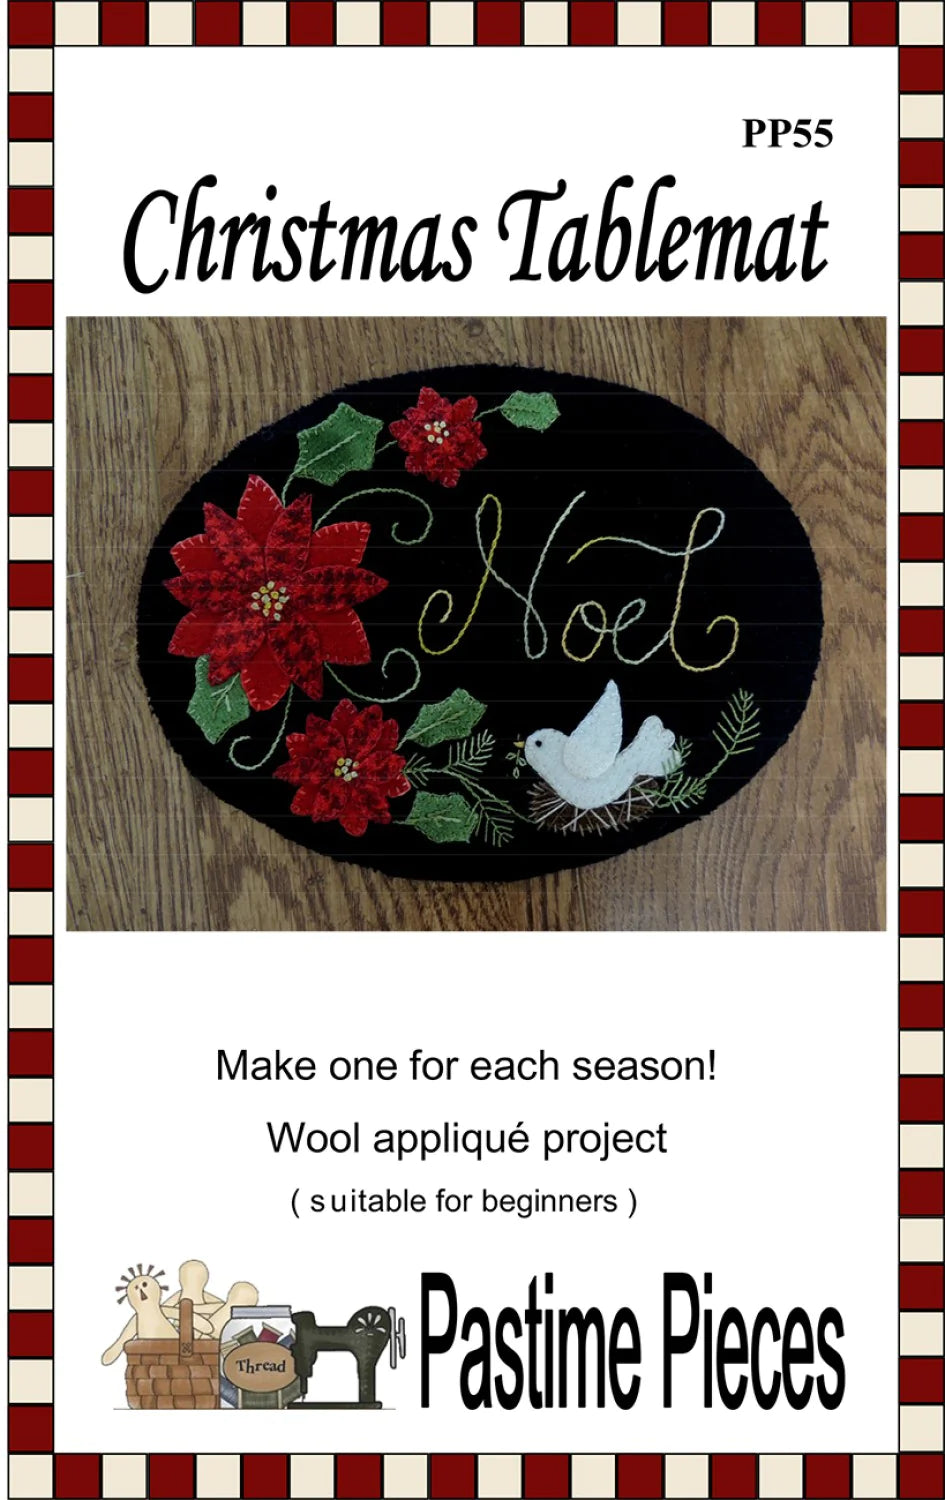 Christmas Tablemat PP55